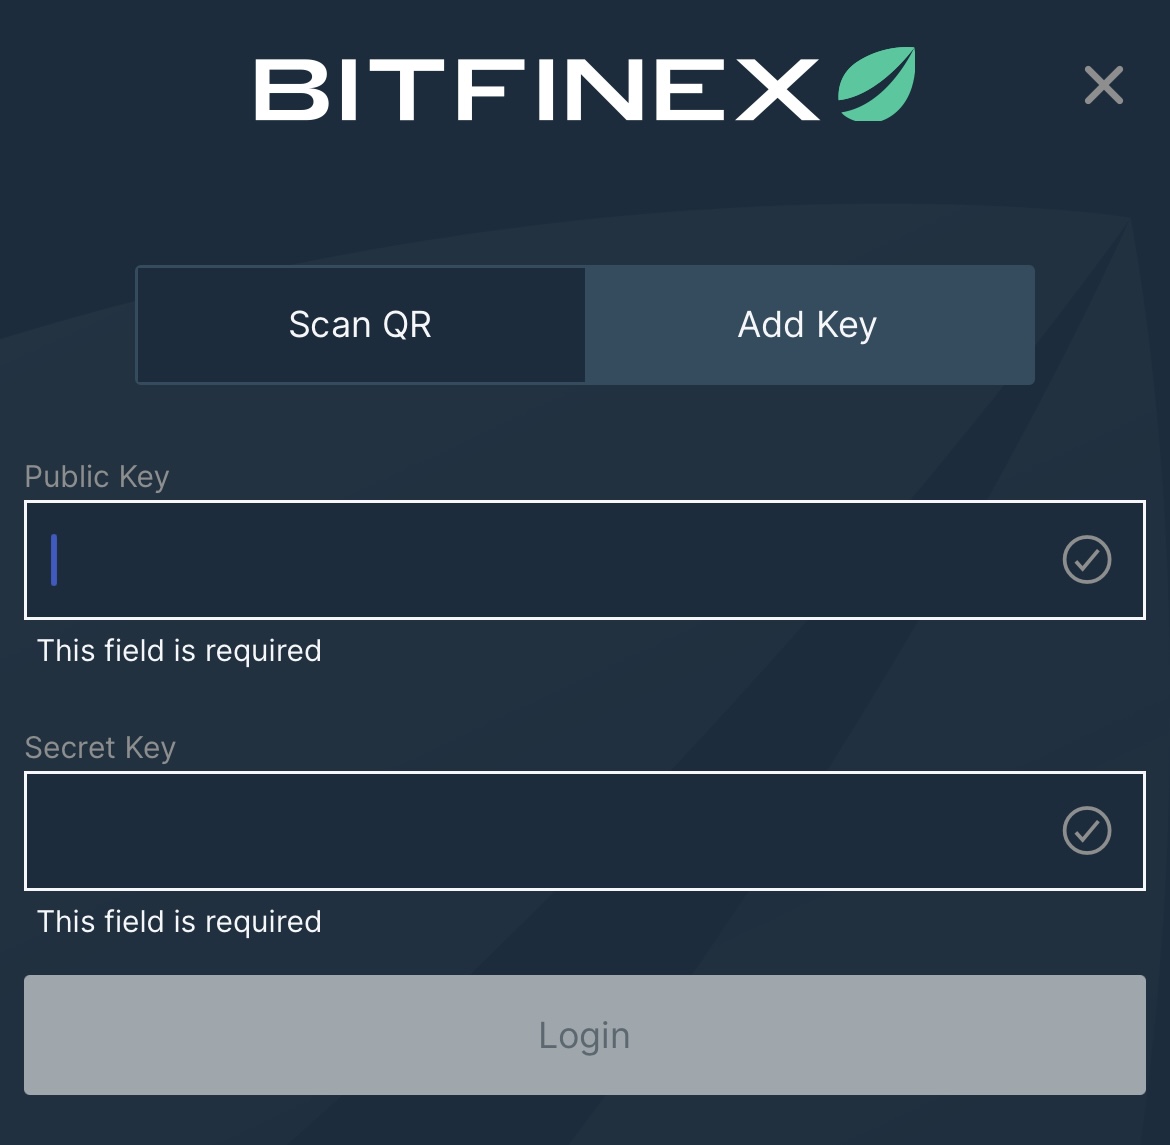 How_to_log_in_to_the_Bitfinex_Mobile_App3.jpg